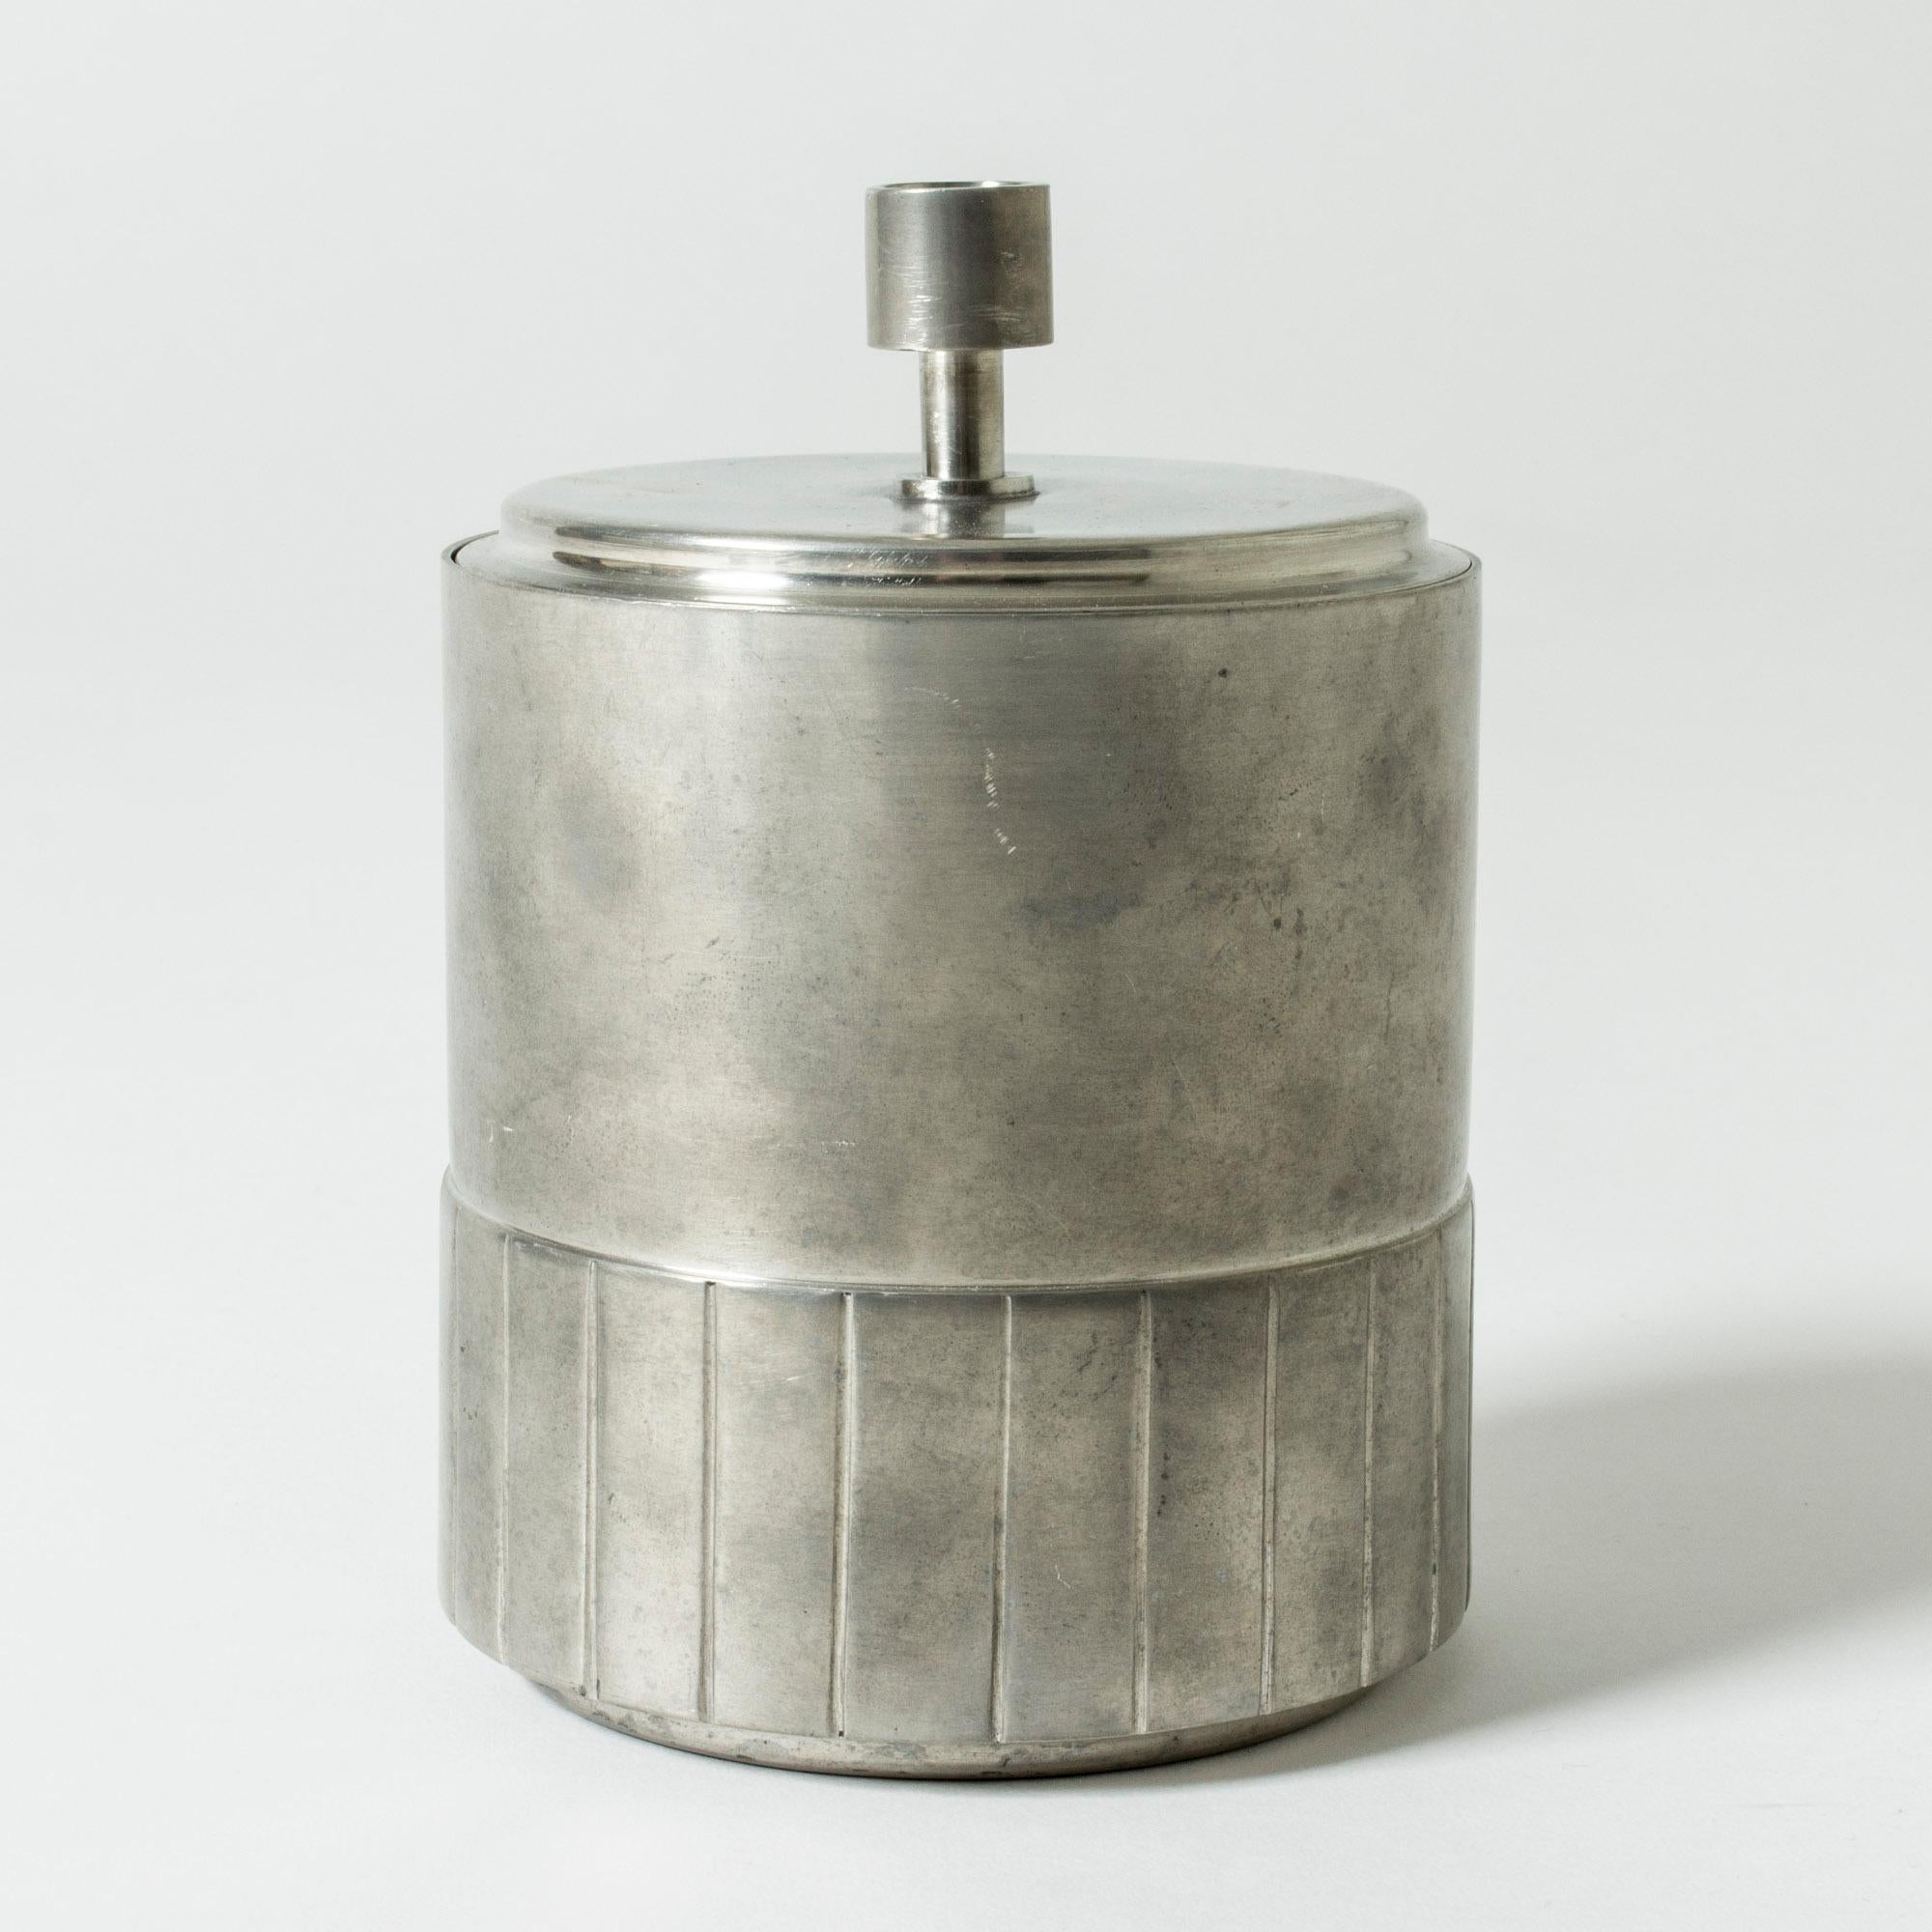 Elegant pewter jar from GAB, in a strict cylinder form with a pattern of stripes. Nice even patina.